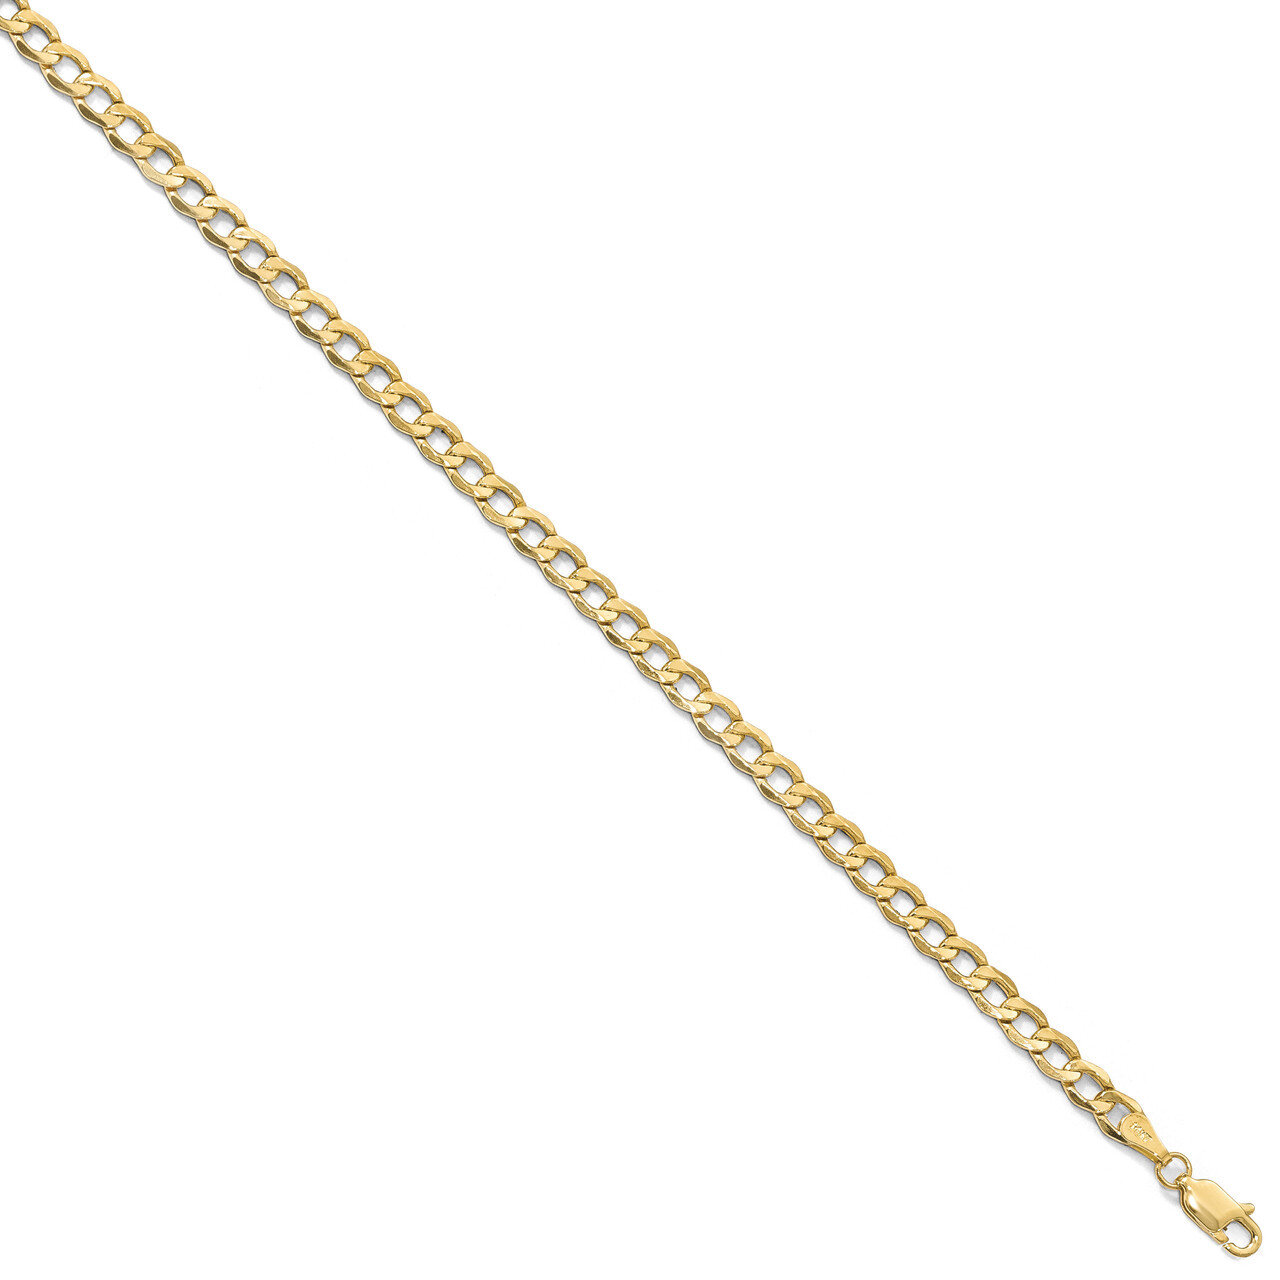 4.3mm Semi-Solid Curb Link Chain 8 Inch 10k Gold HB-8240-8